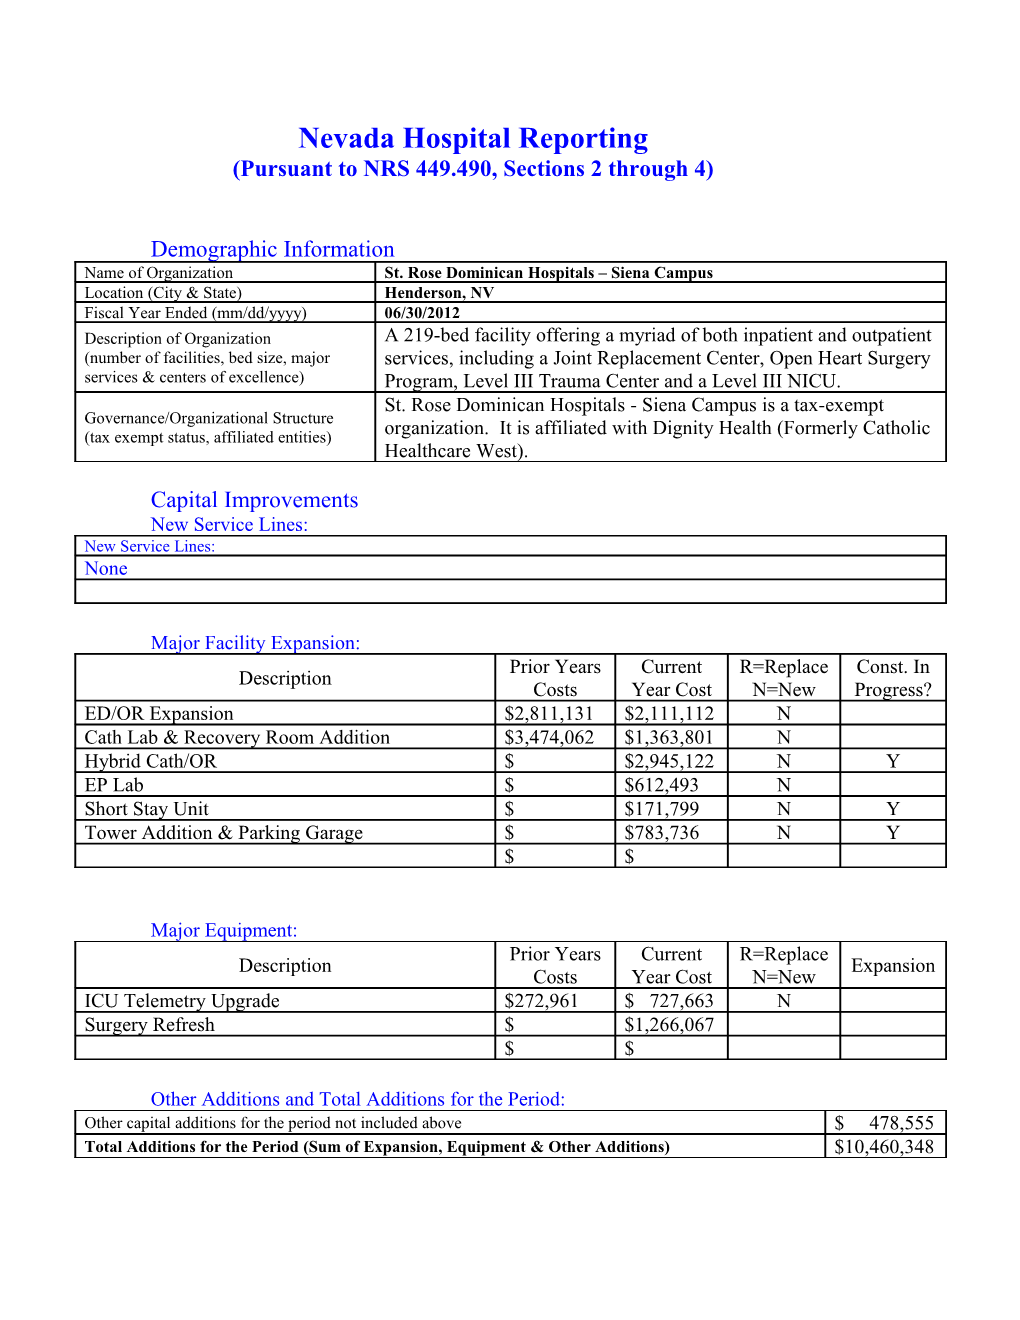 Nevada Community Benefit Reporting Template s1